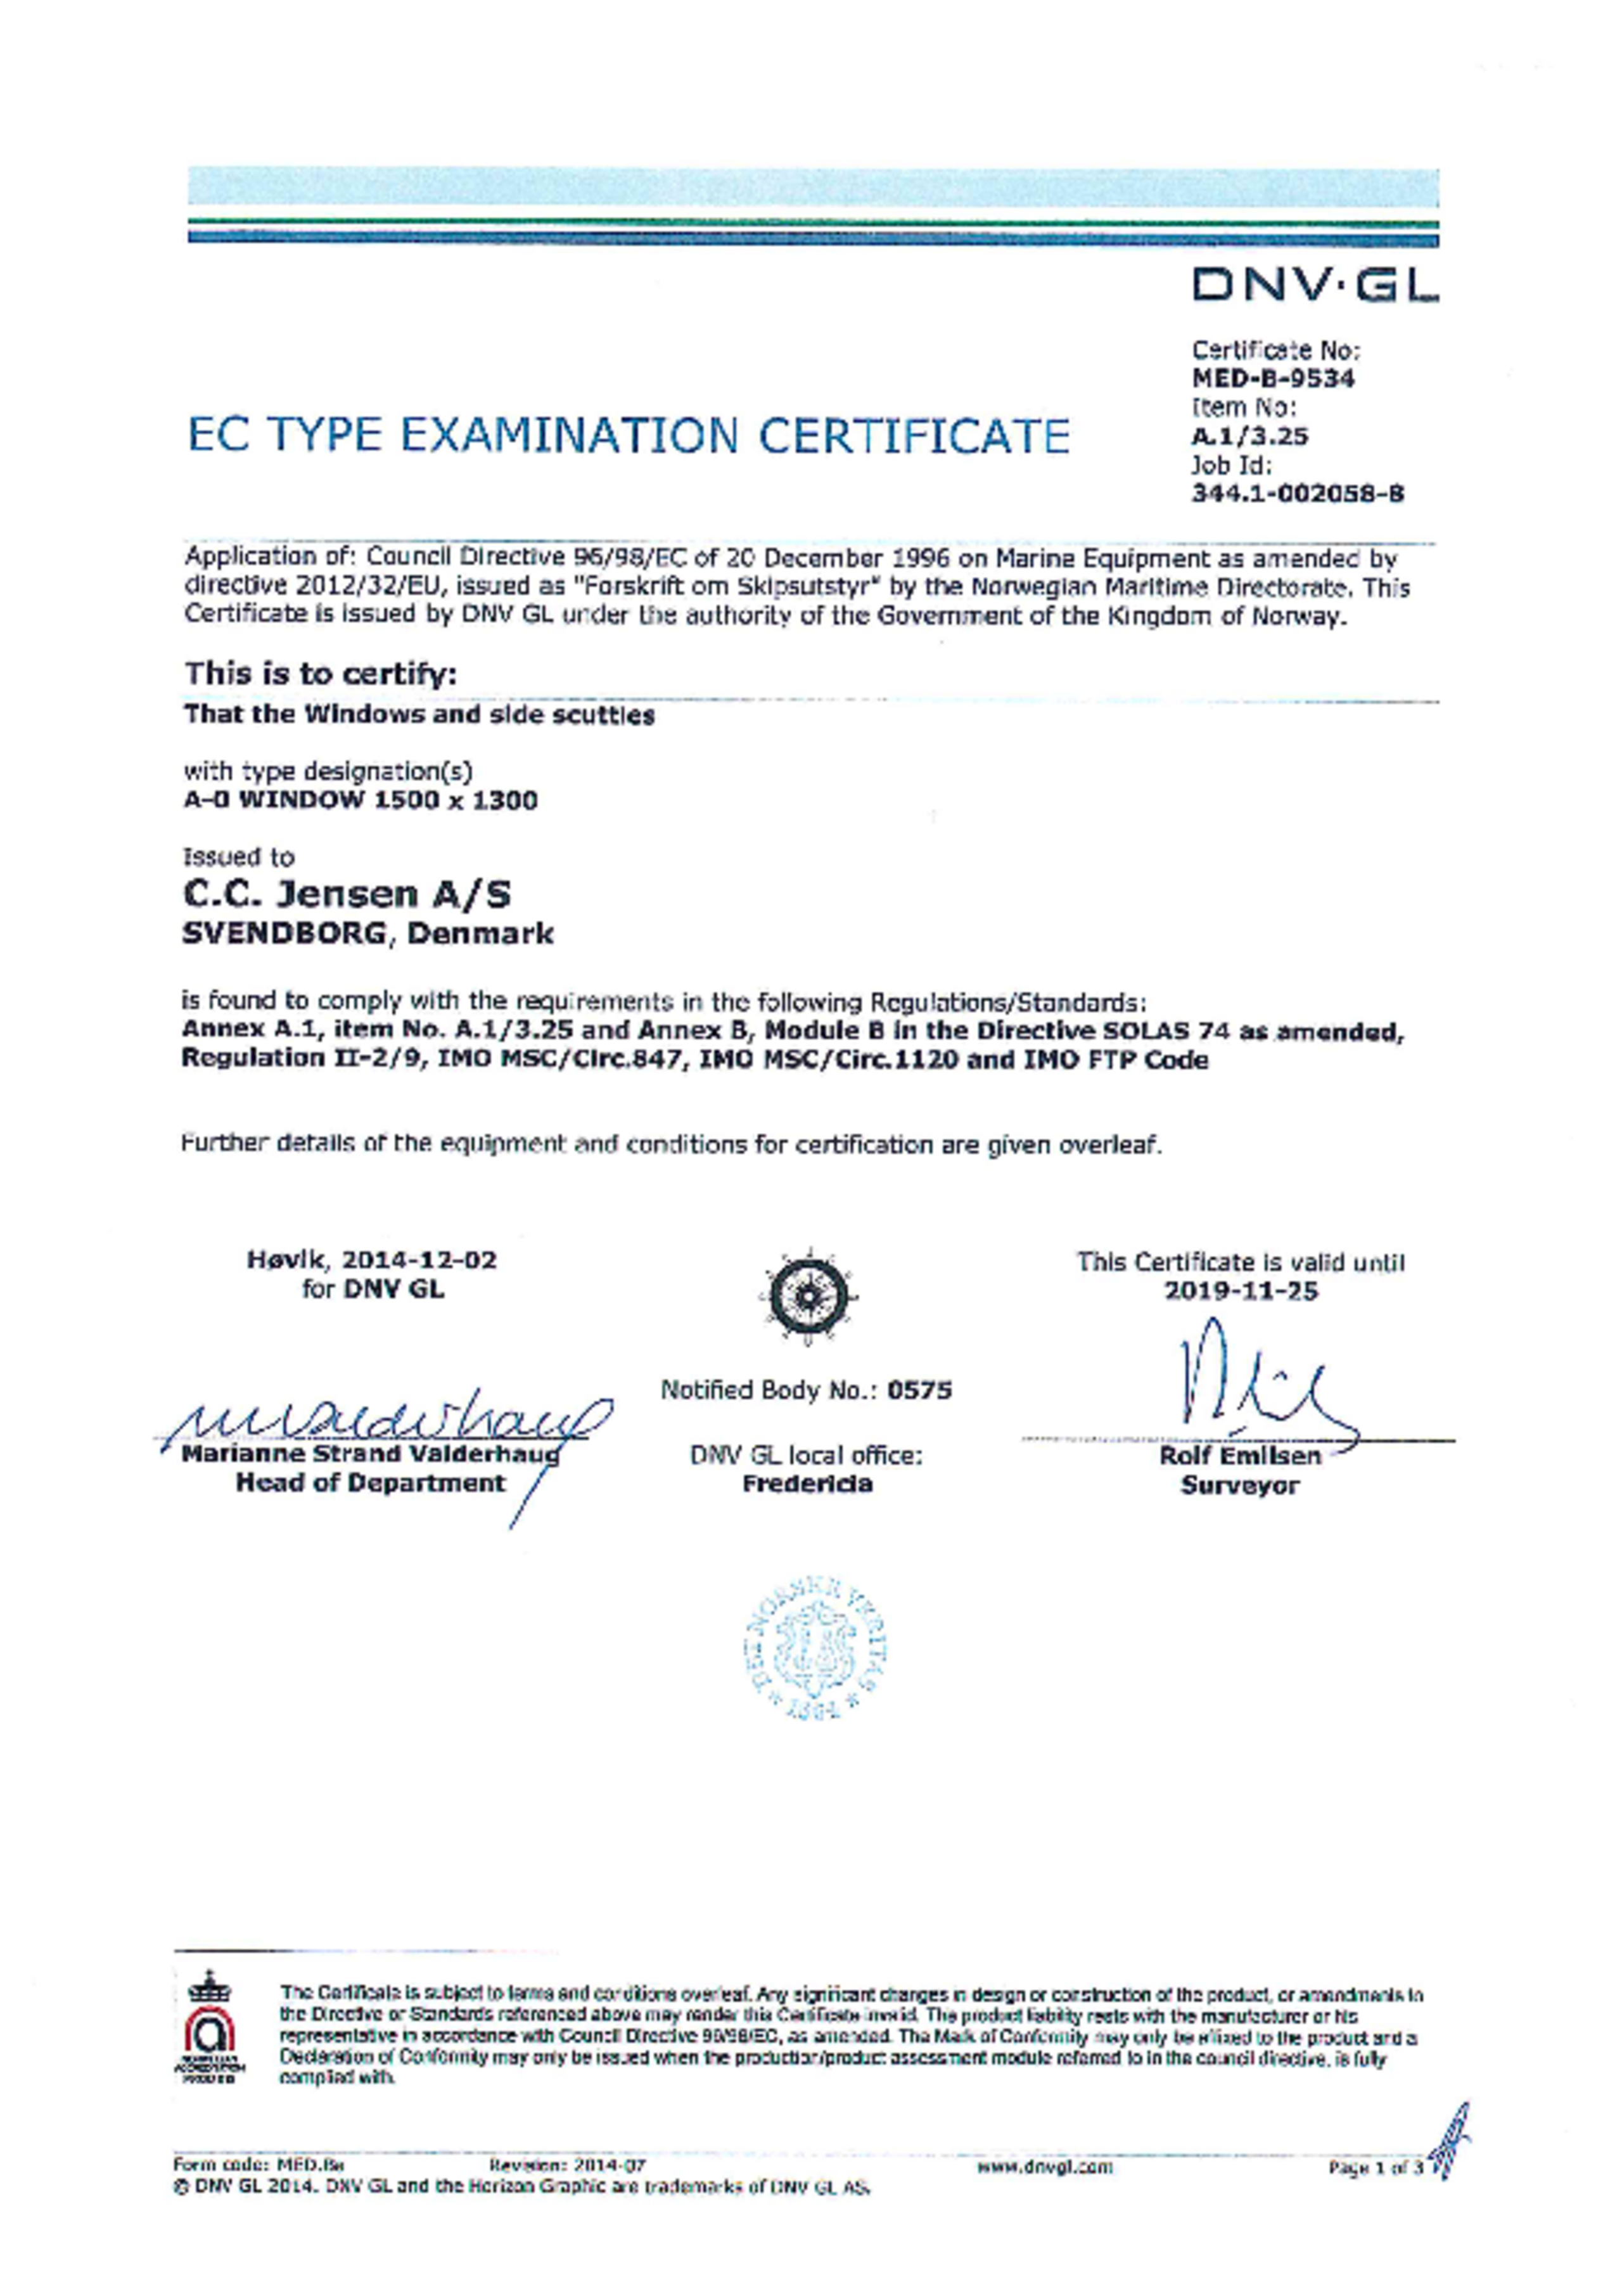 EC type examination certificate, 2014 by DNV-GL